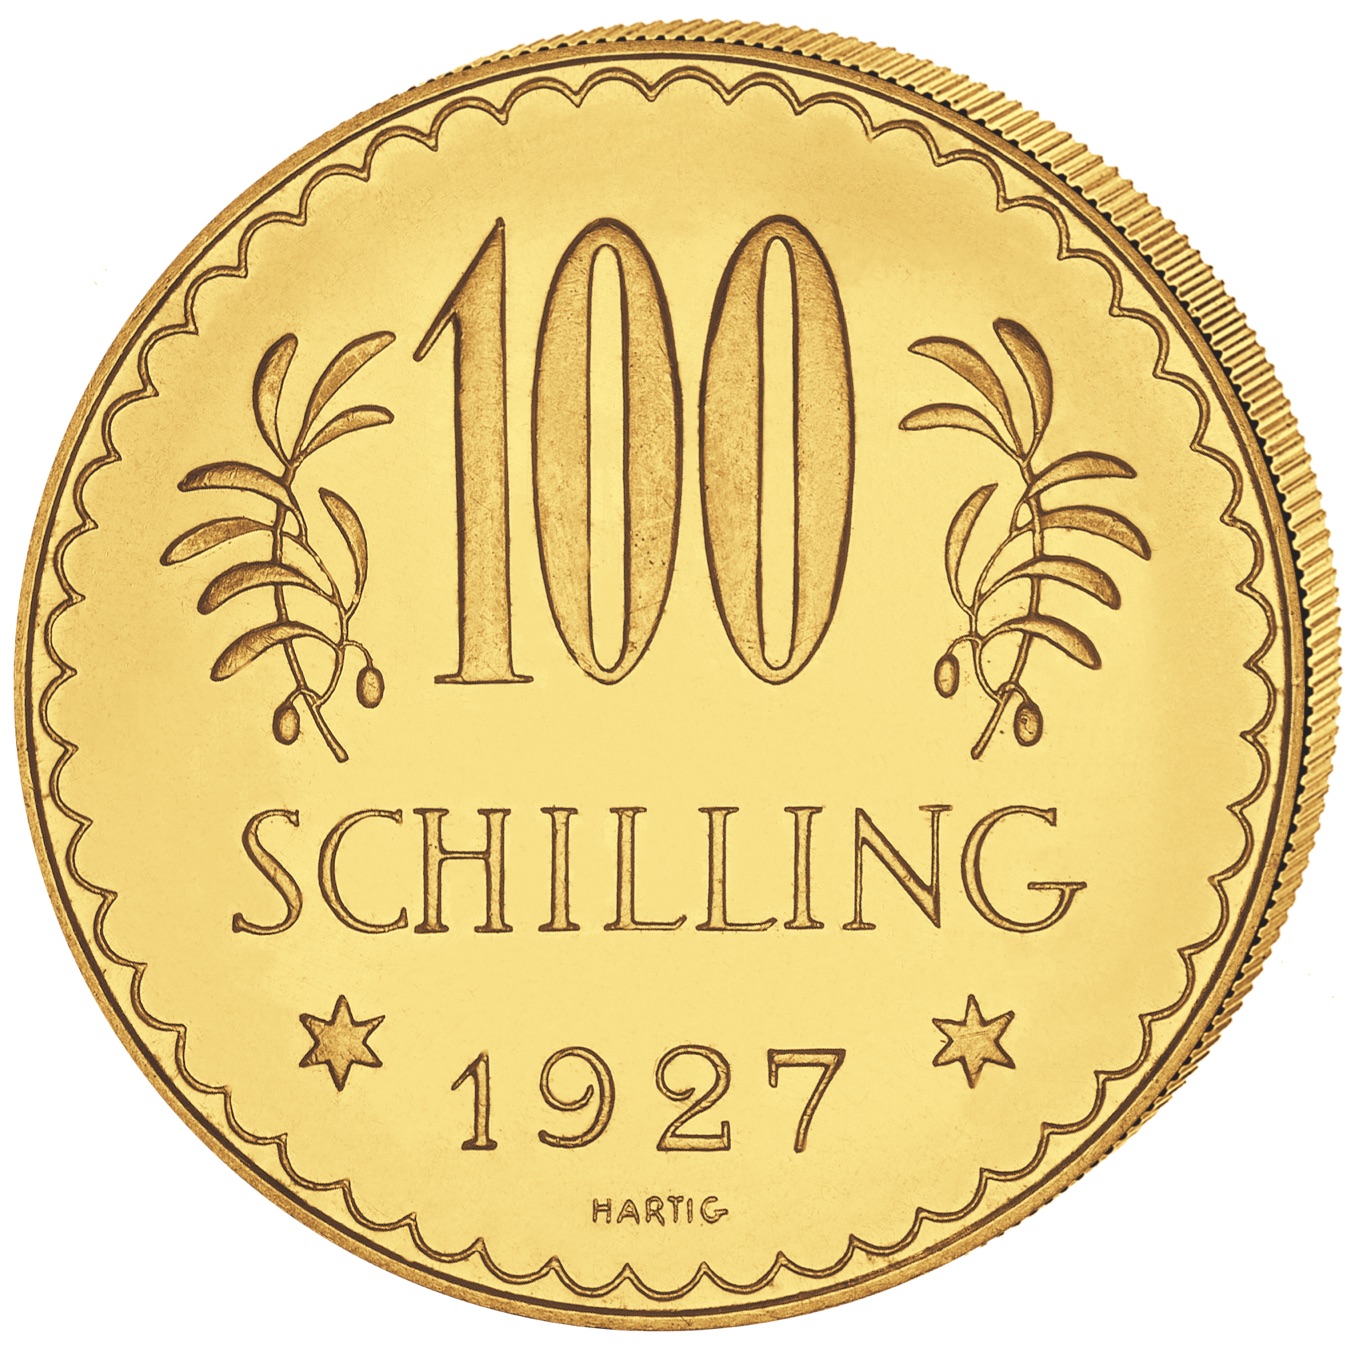 AT 100 Schilling 1929